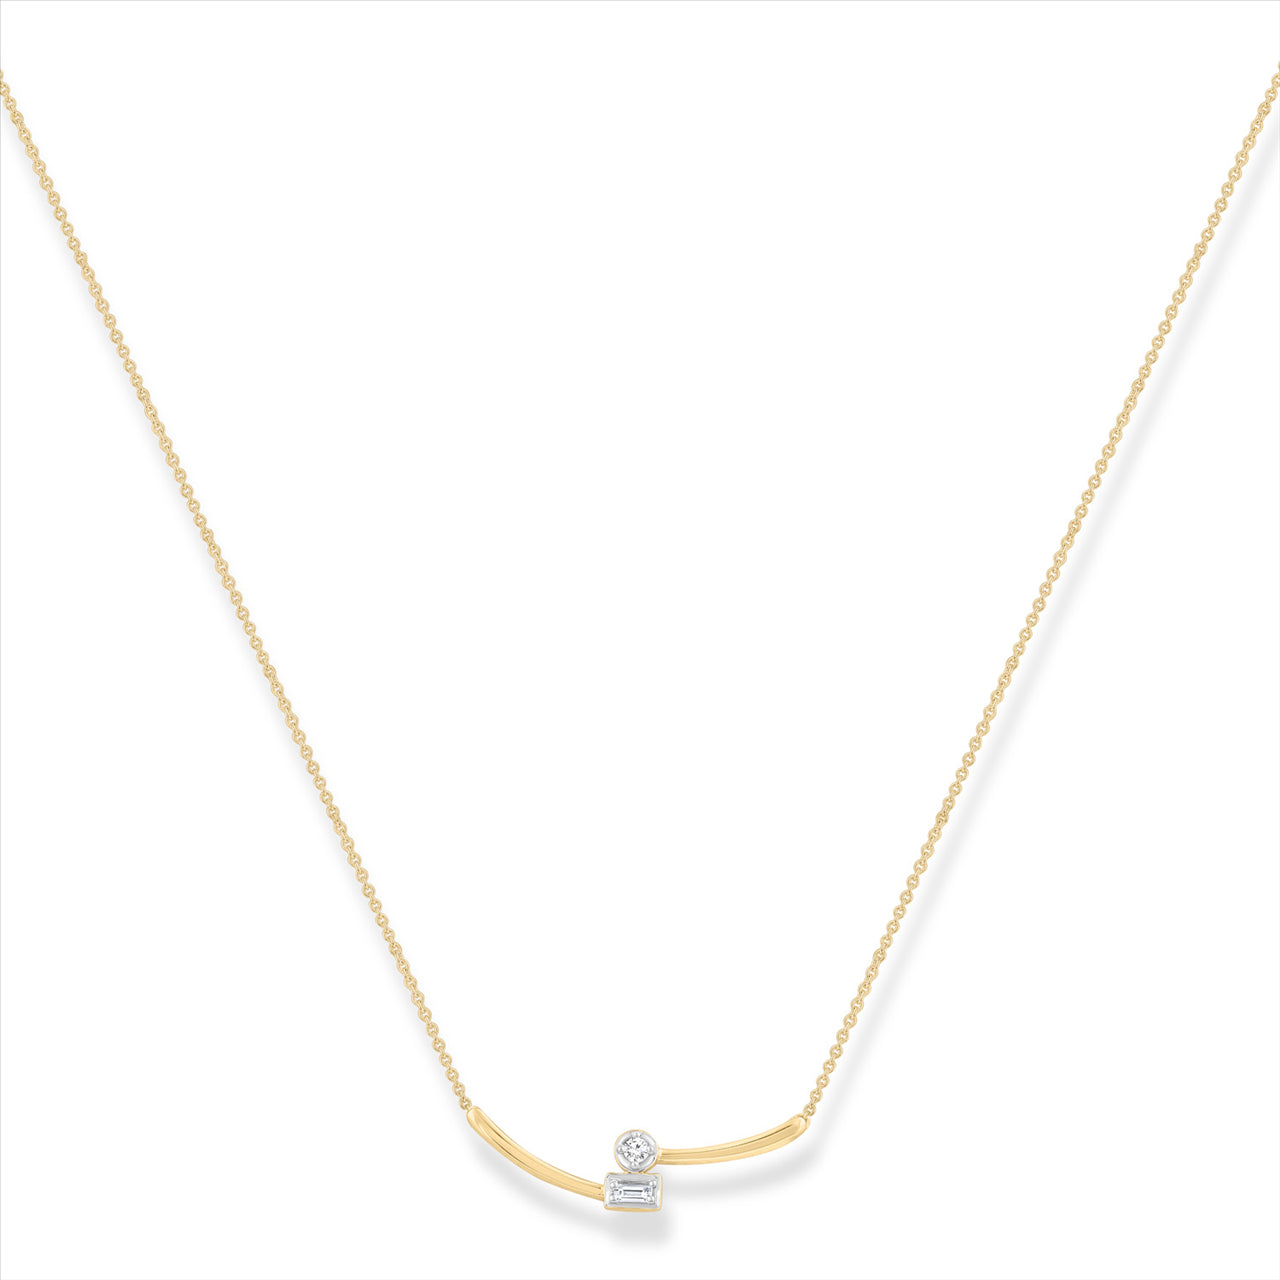 9ct Gold Diamond Bar Solitaire Necklace.